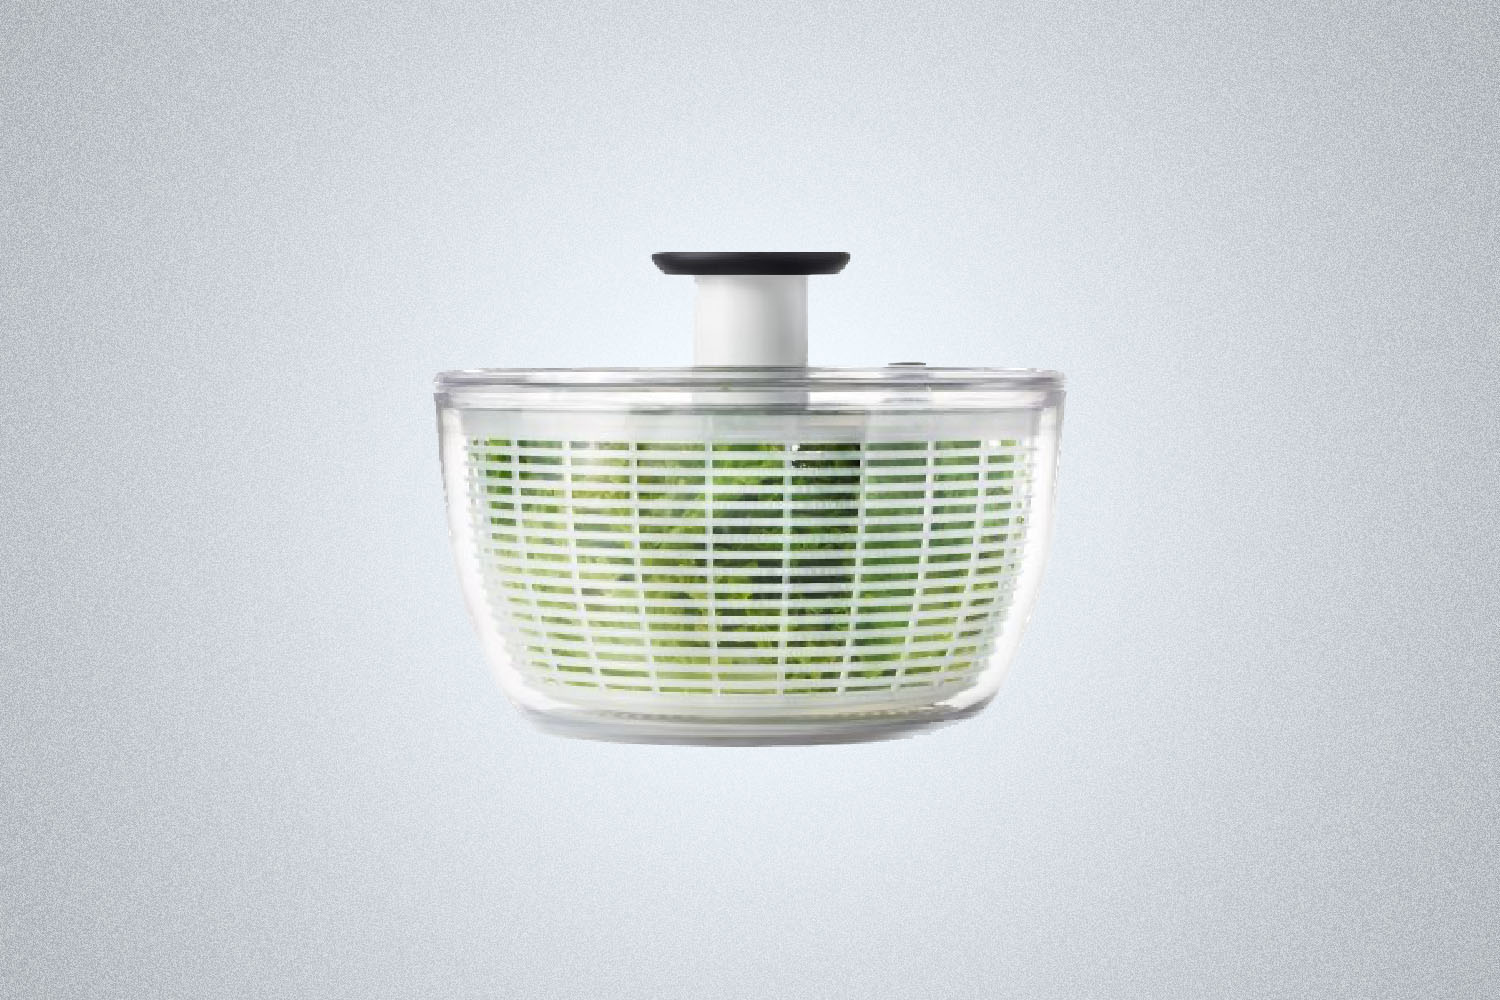 Spin Up Your Summer Salad In Style With the OXO Salad Spinner - InsideHook